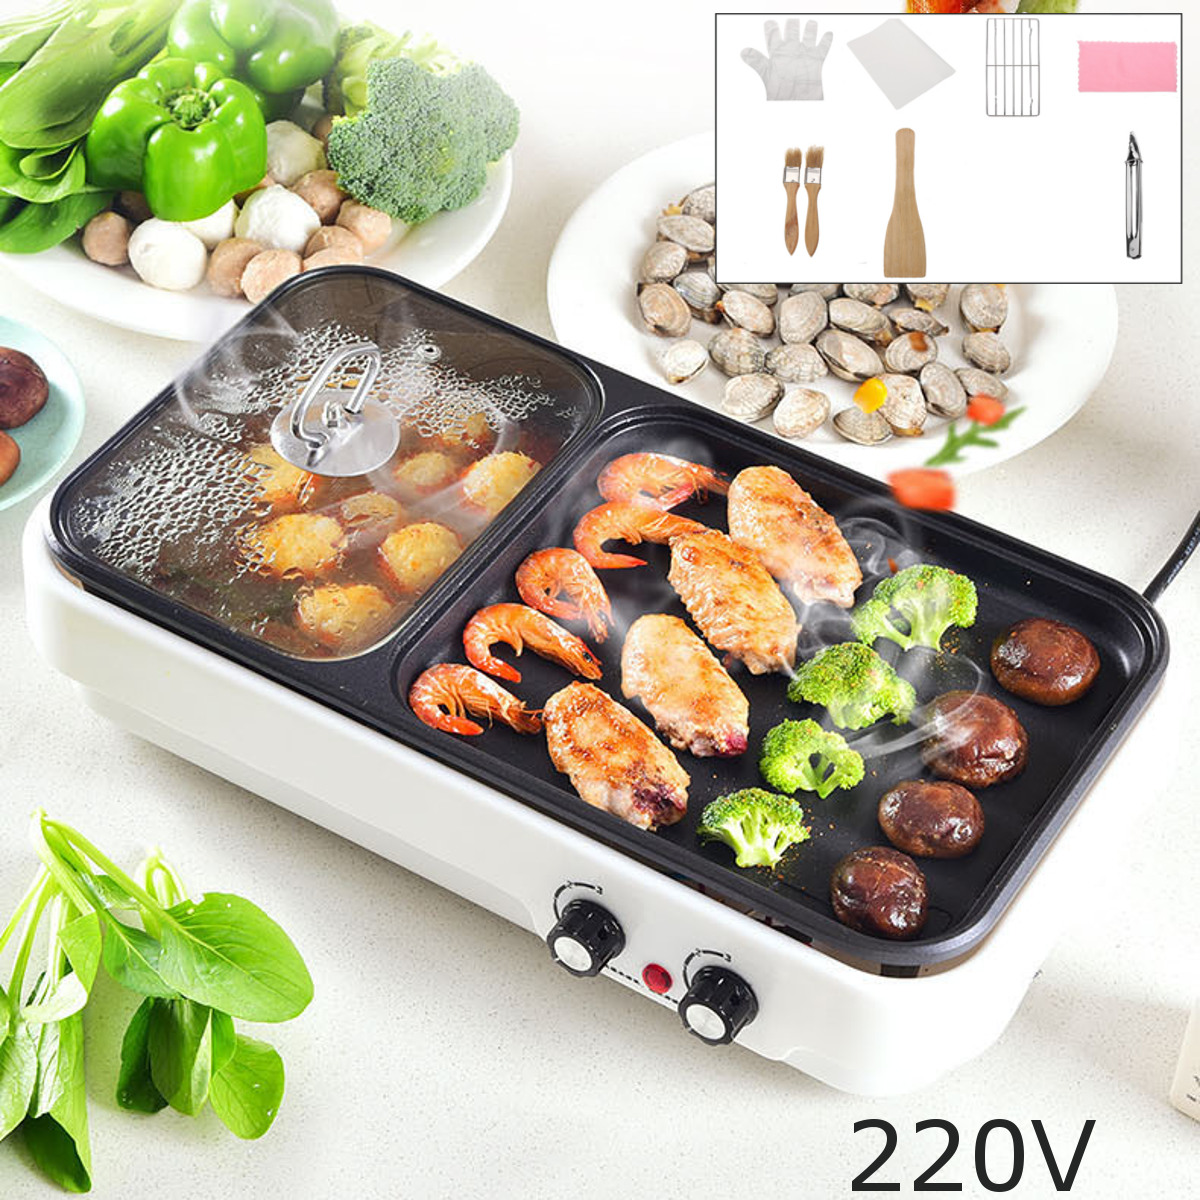 Electric Baking Pan Barbecue Hot Pot Non Stick BBQ Grill Oven Kitchen Cookware 15